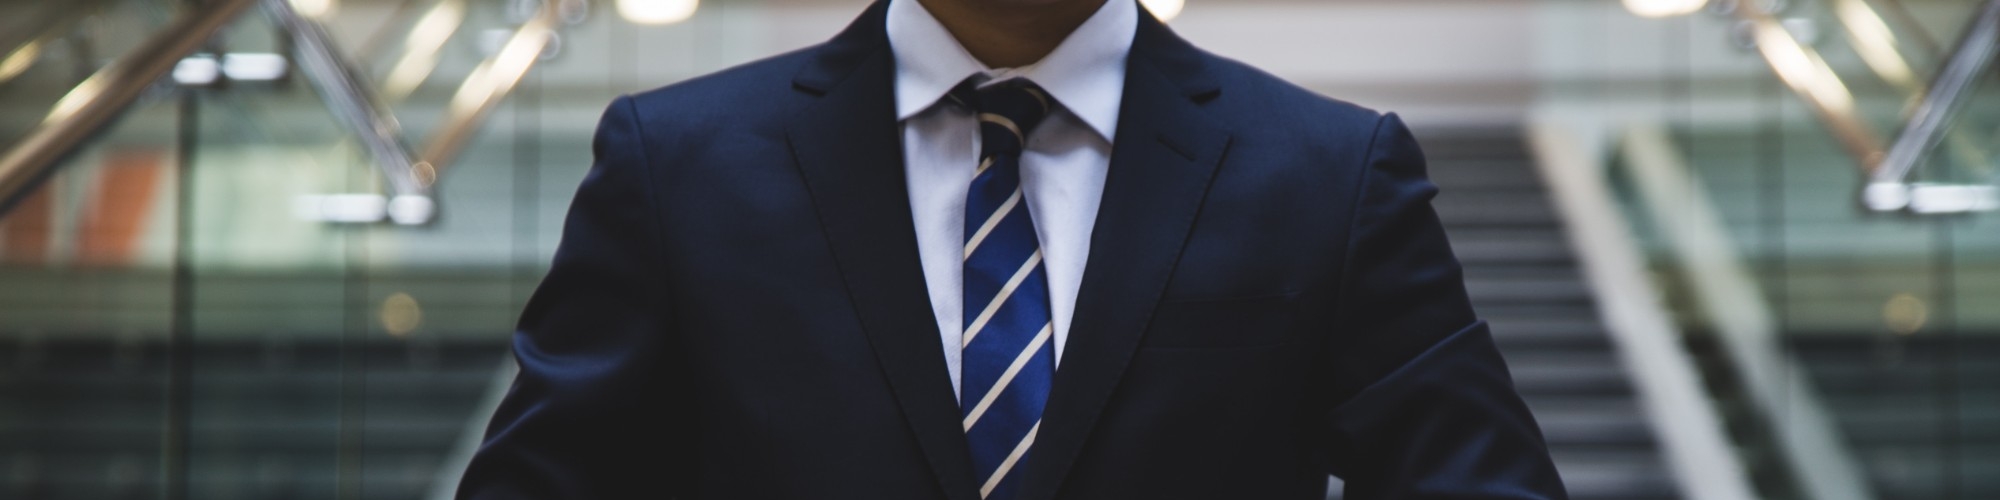 torso of a man wearing a suit and tie